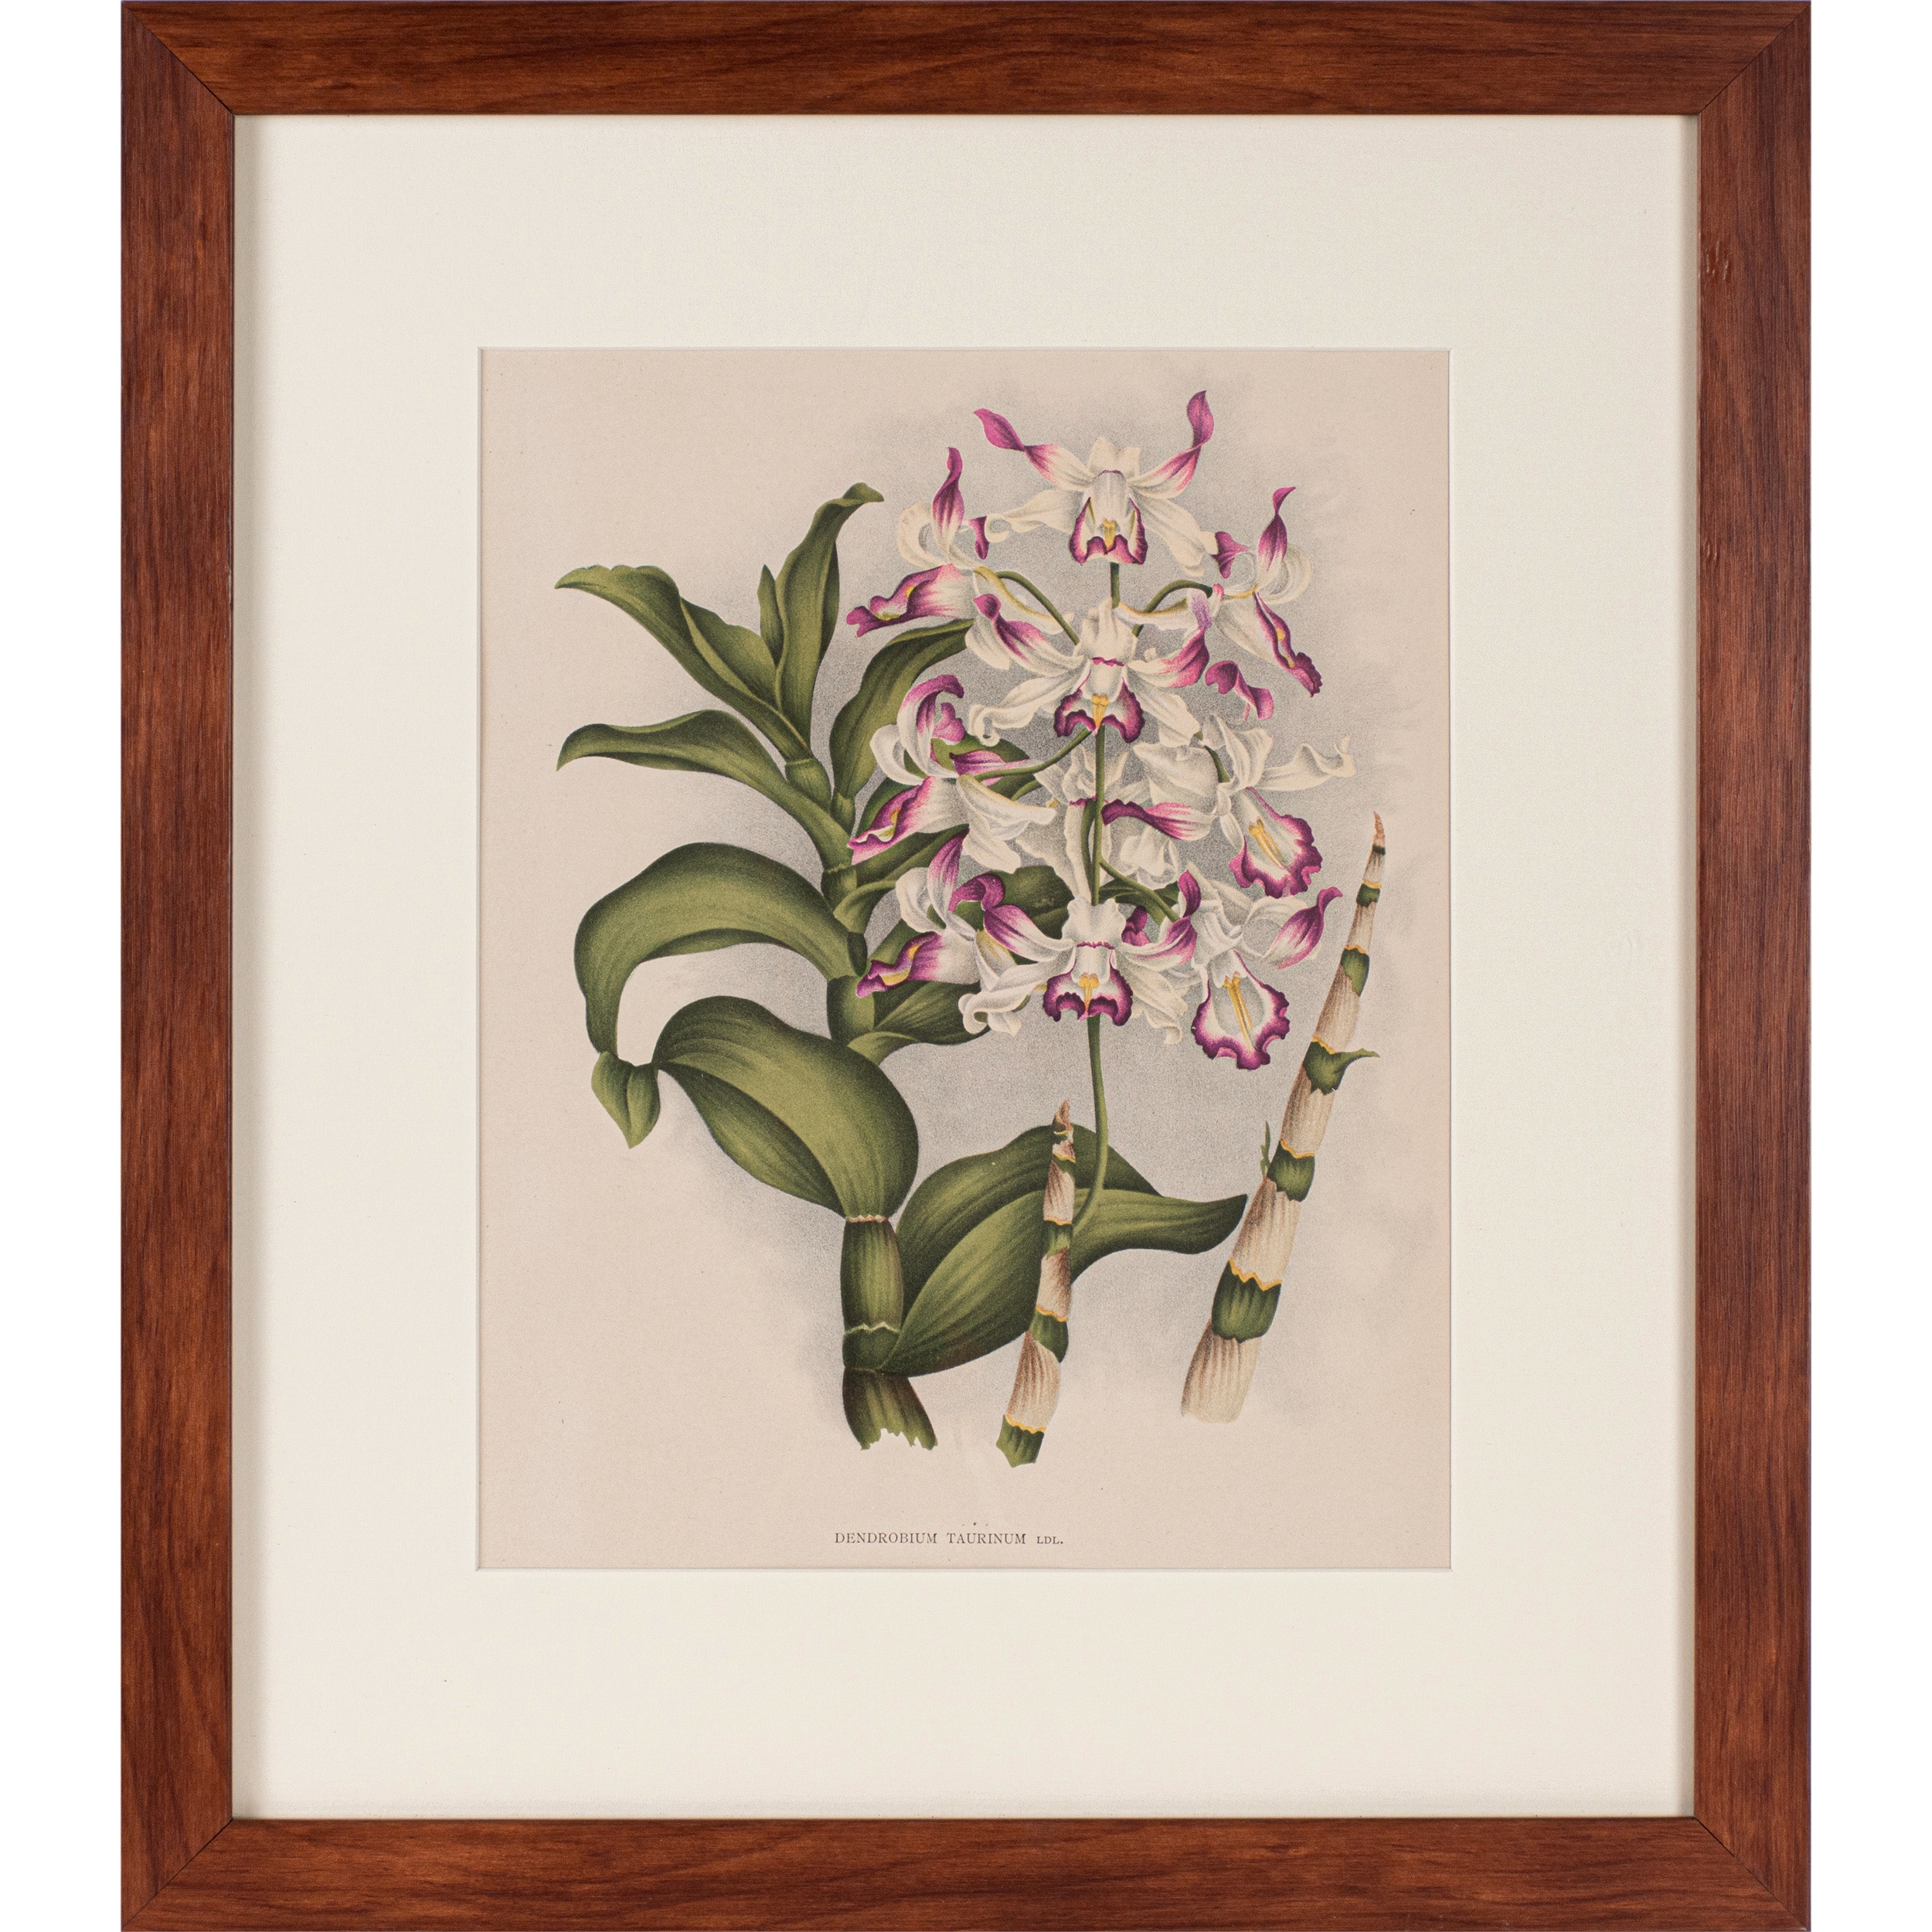 Artwork by Jean Jules Linden, Dendrobium taurinum, Made of Colored lithograph